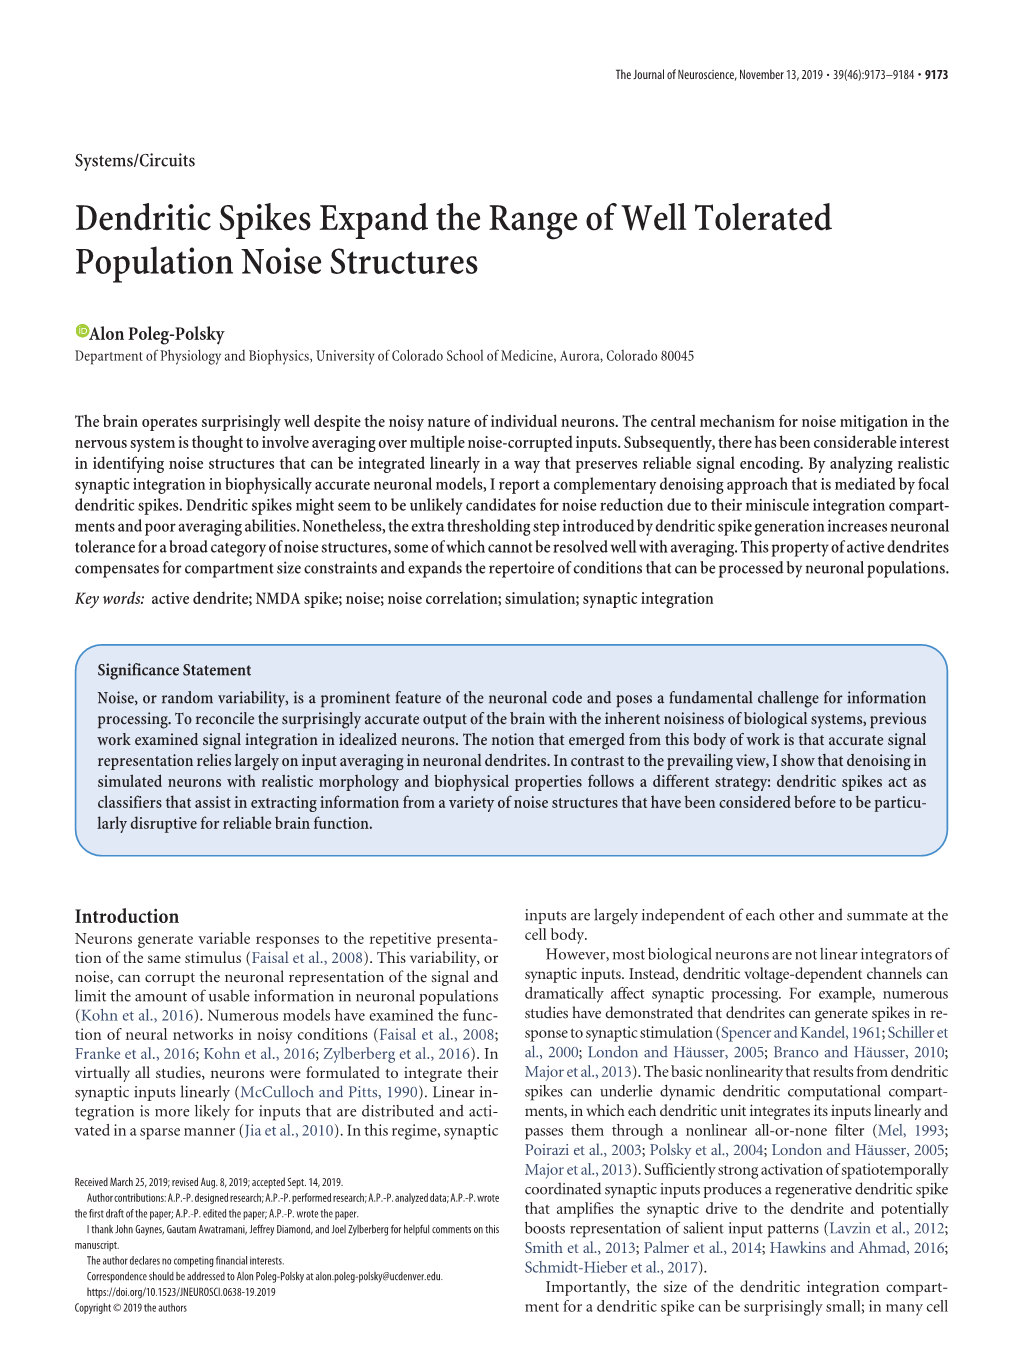 Dendritic Spikes Expand the Range of Well Tolerated Population Noise Structures